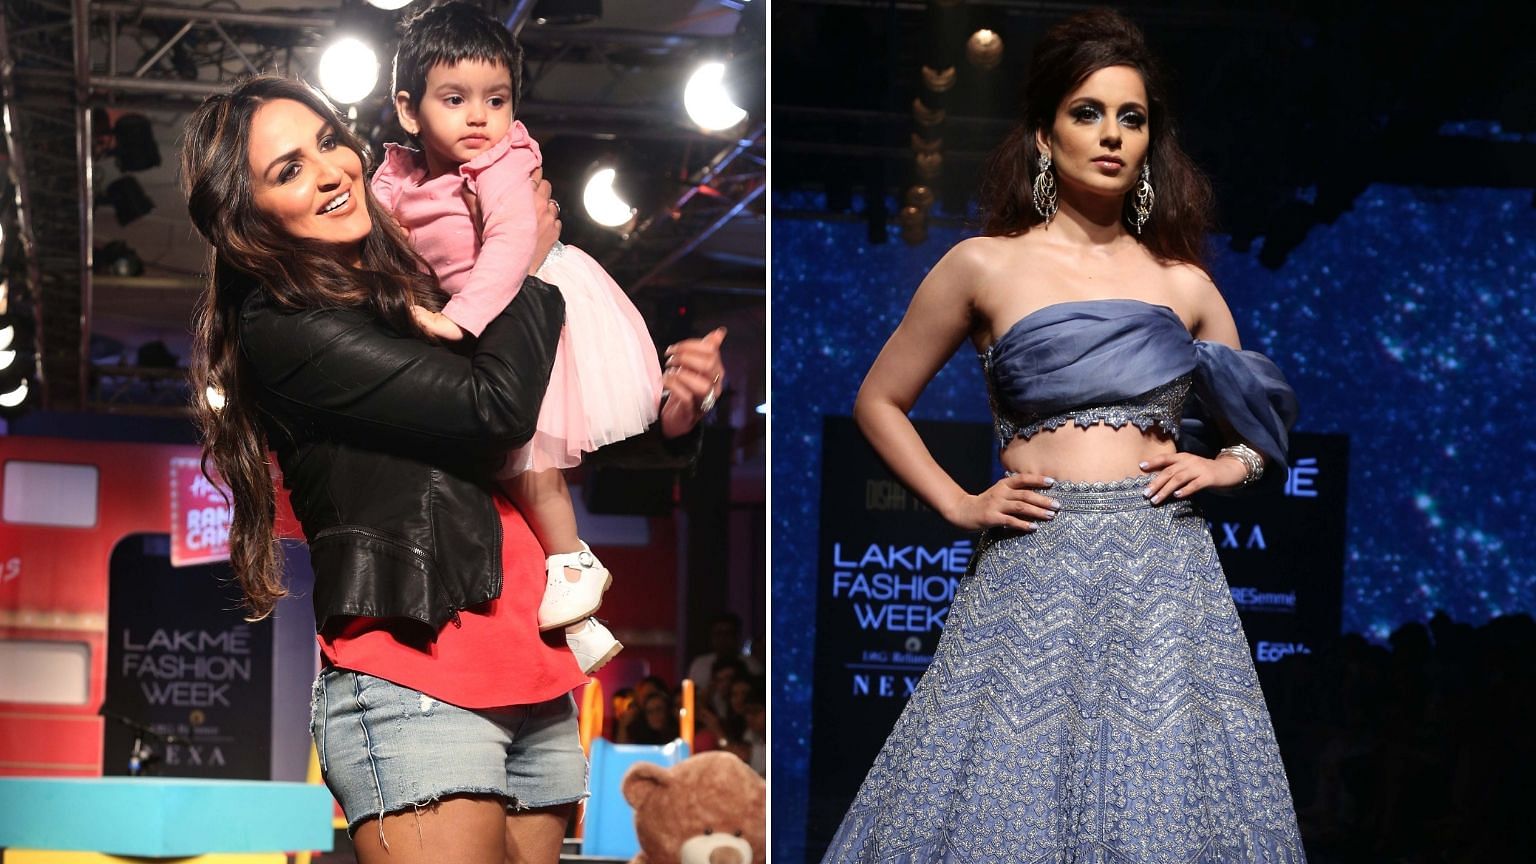 Esha Deol and Kangana Ranaut were showstoppers at LFW 2019.